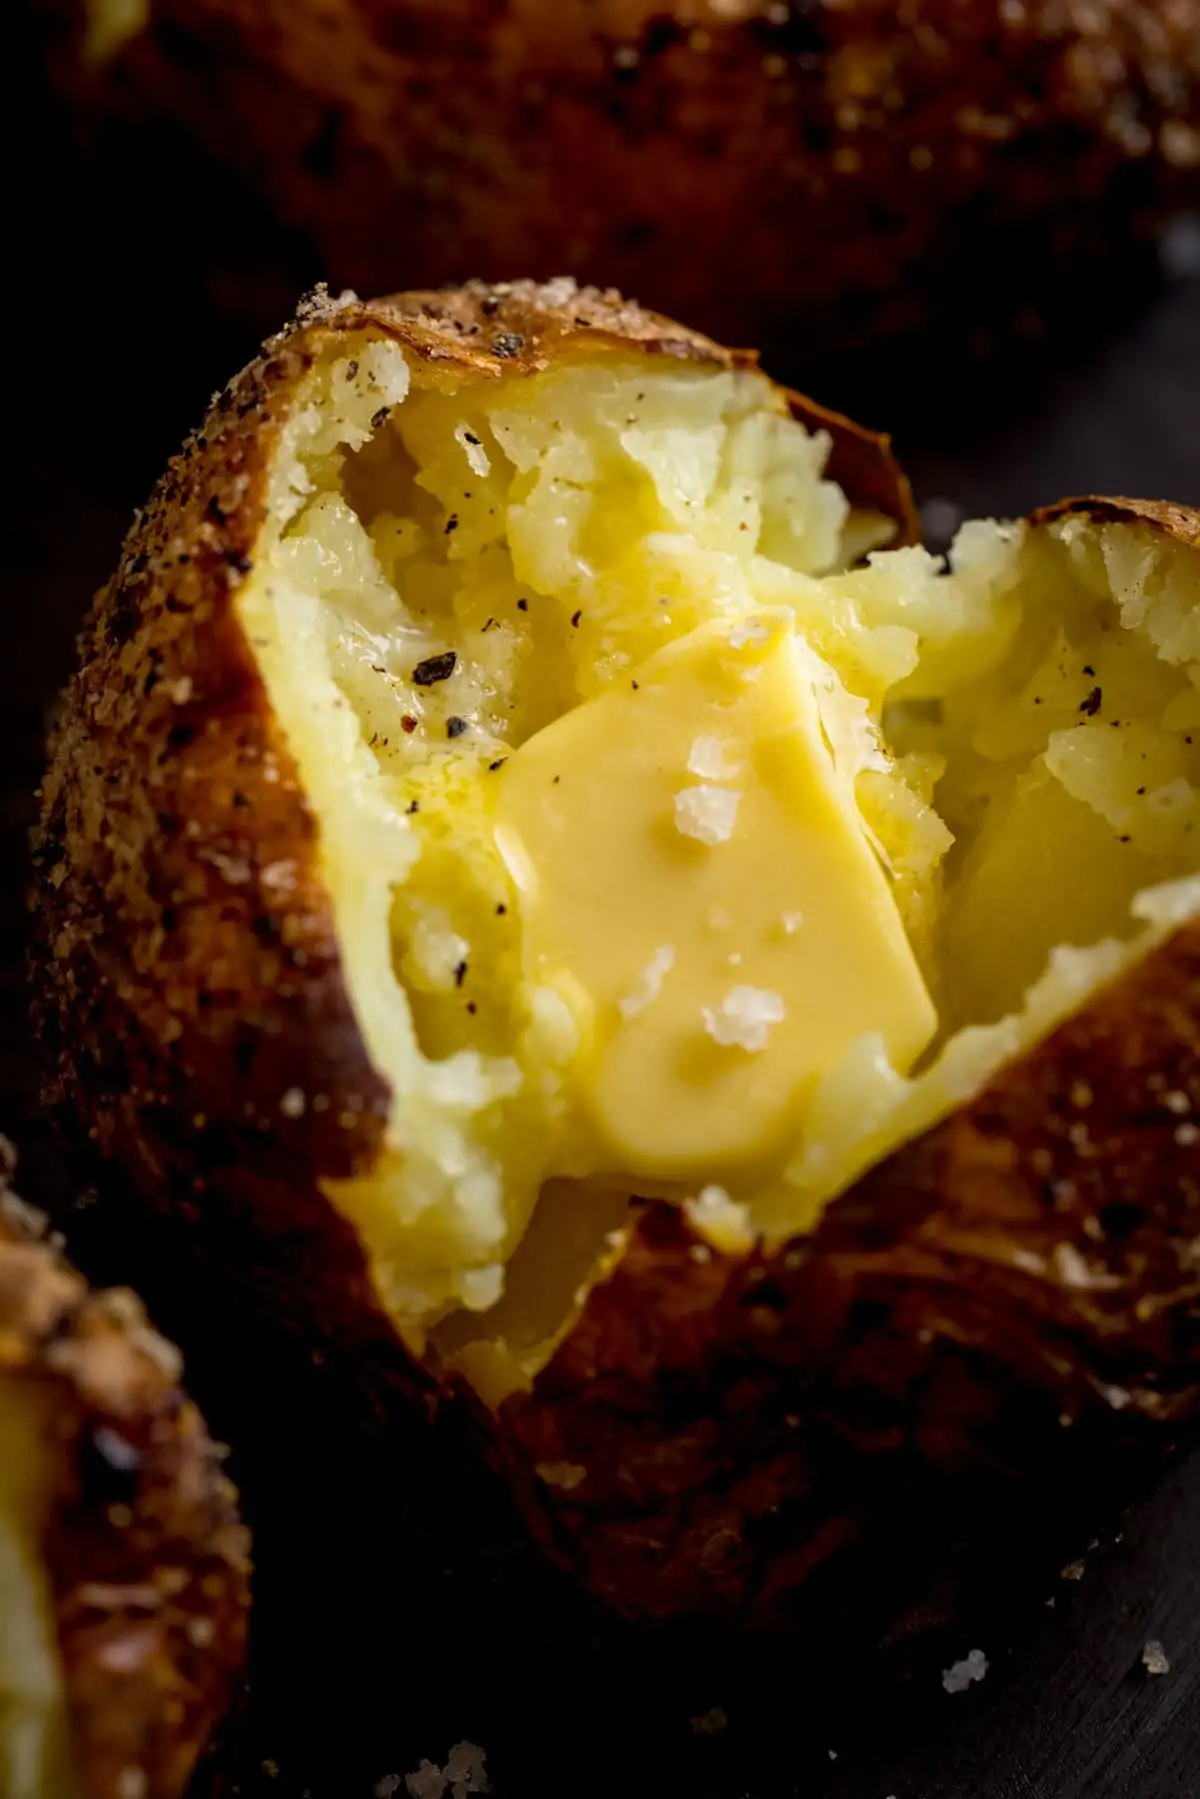 Close up image of an open baked potato, filled with a knob of butter.